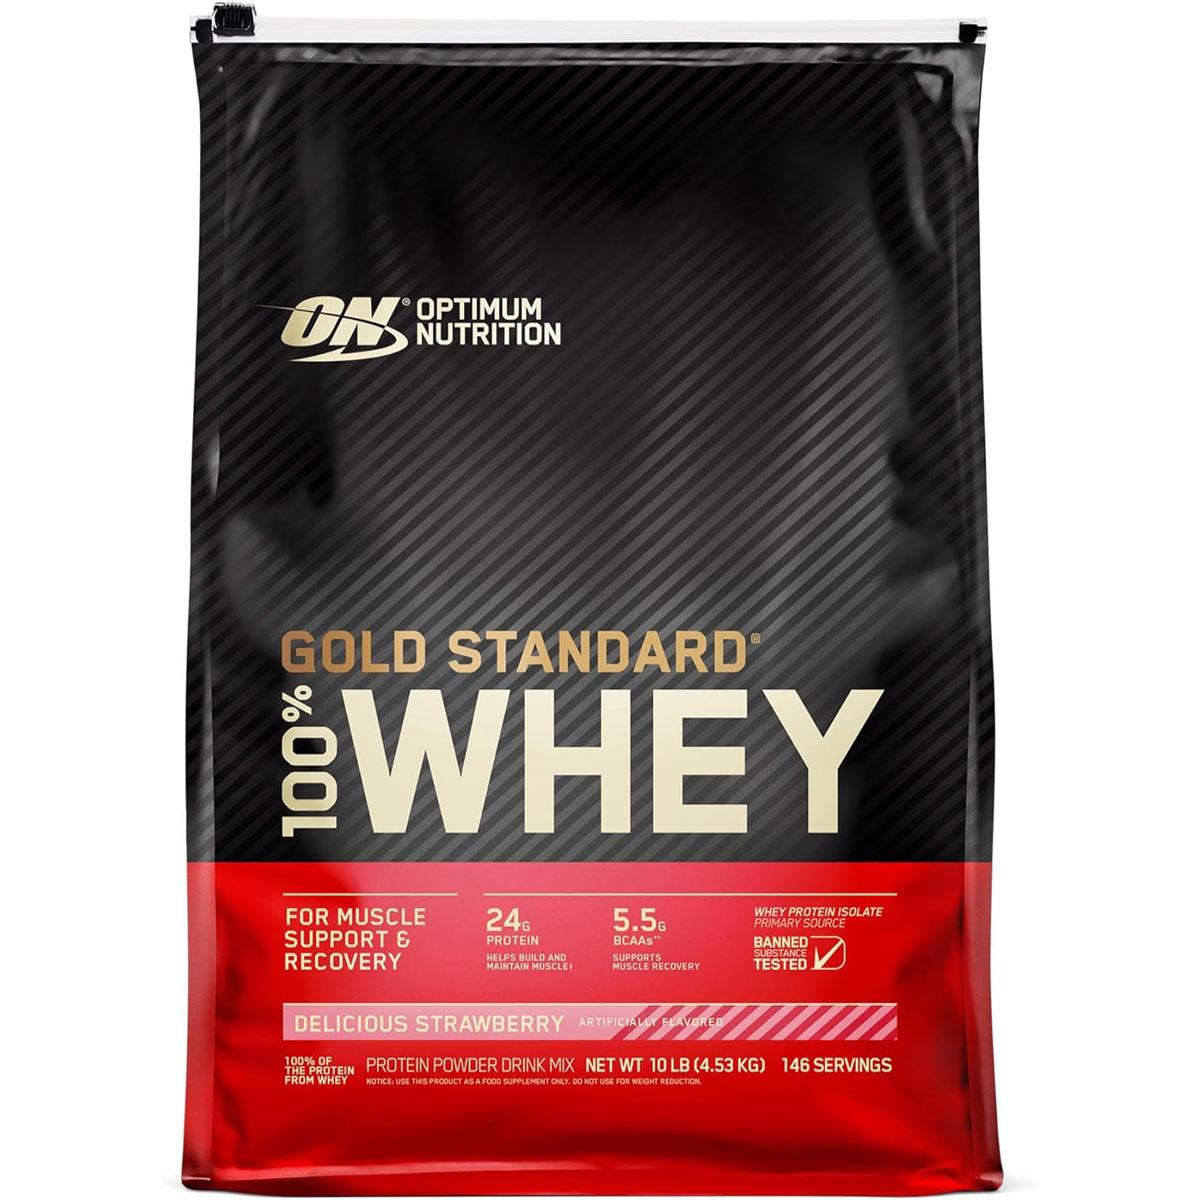 Optimum Nutrition Gold Whey Protein Powder Strawberry 10Lbs for $91.18 Shipped